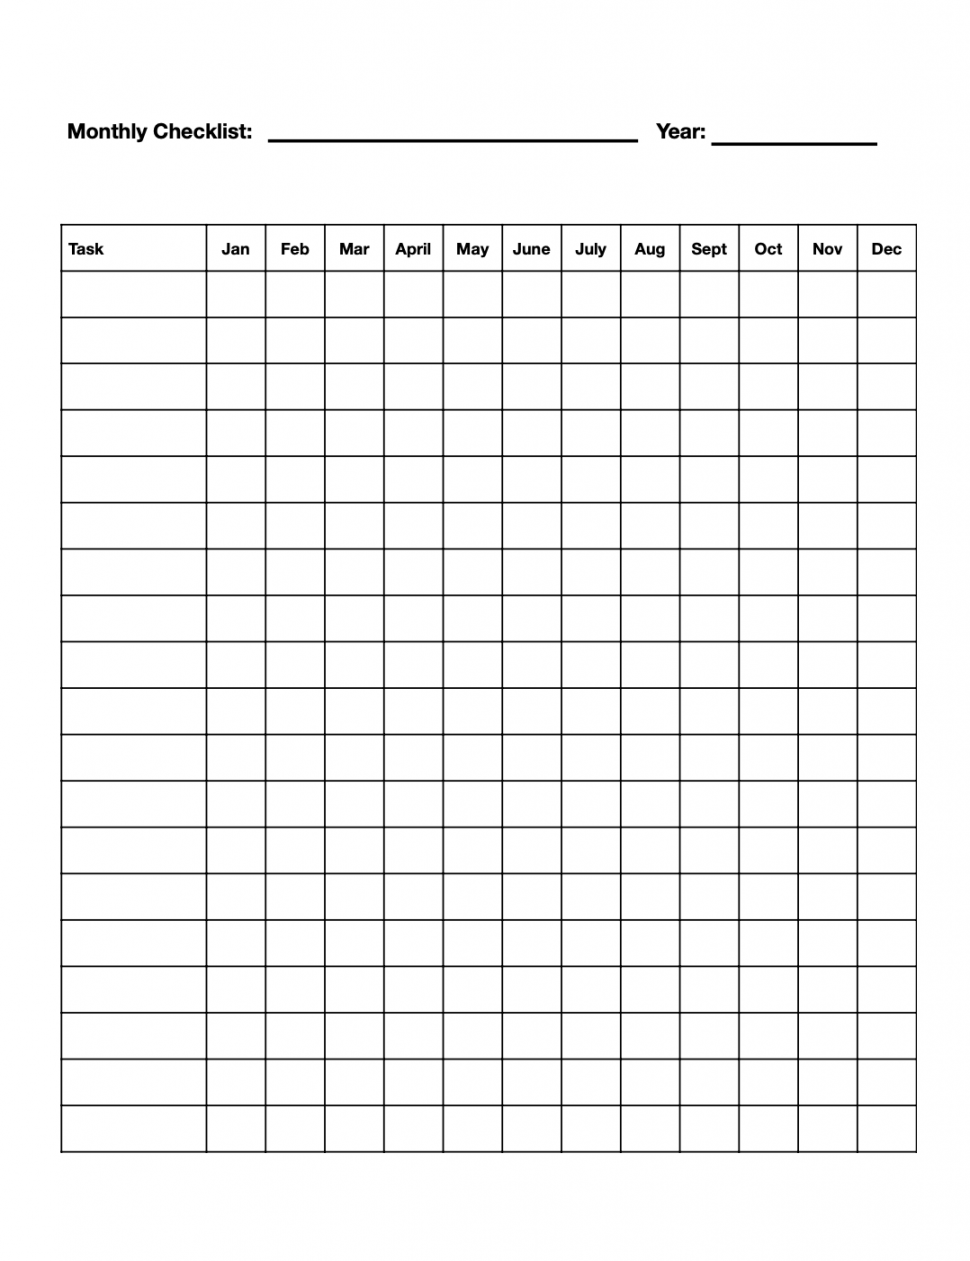 Free Printable Monthly Task Checklist - Daily Printables - FREE Printables - Monthly Checklist